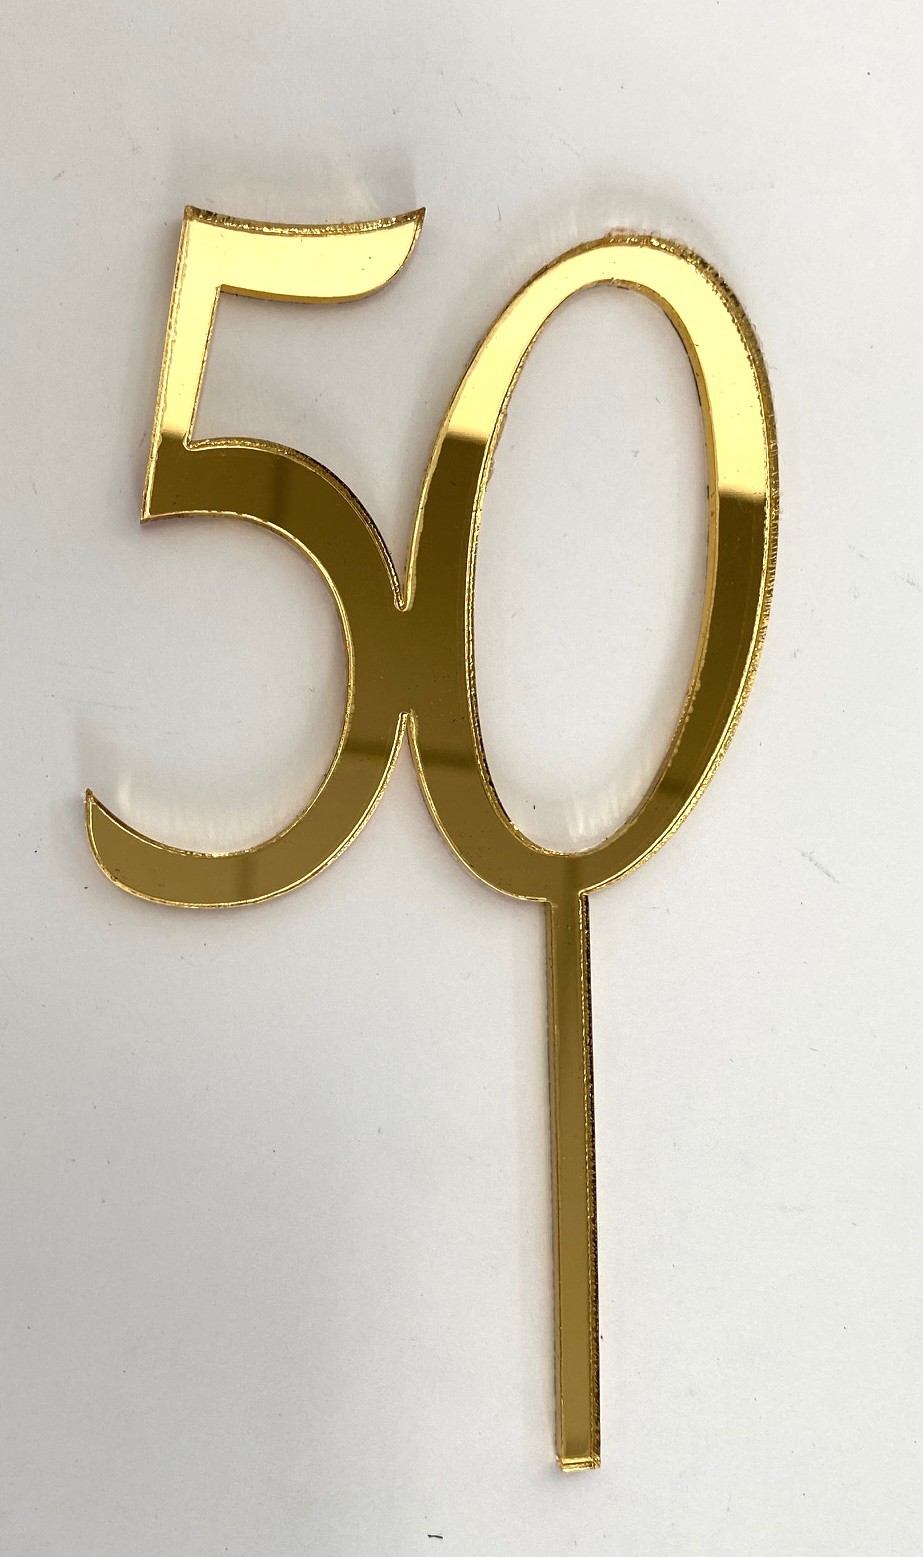 Personalised Golden 50th Anniversary Cake Topper - From Willow